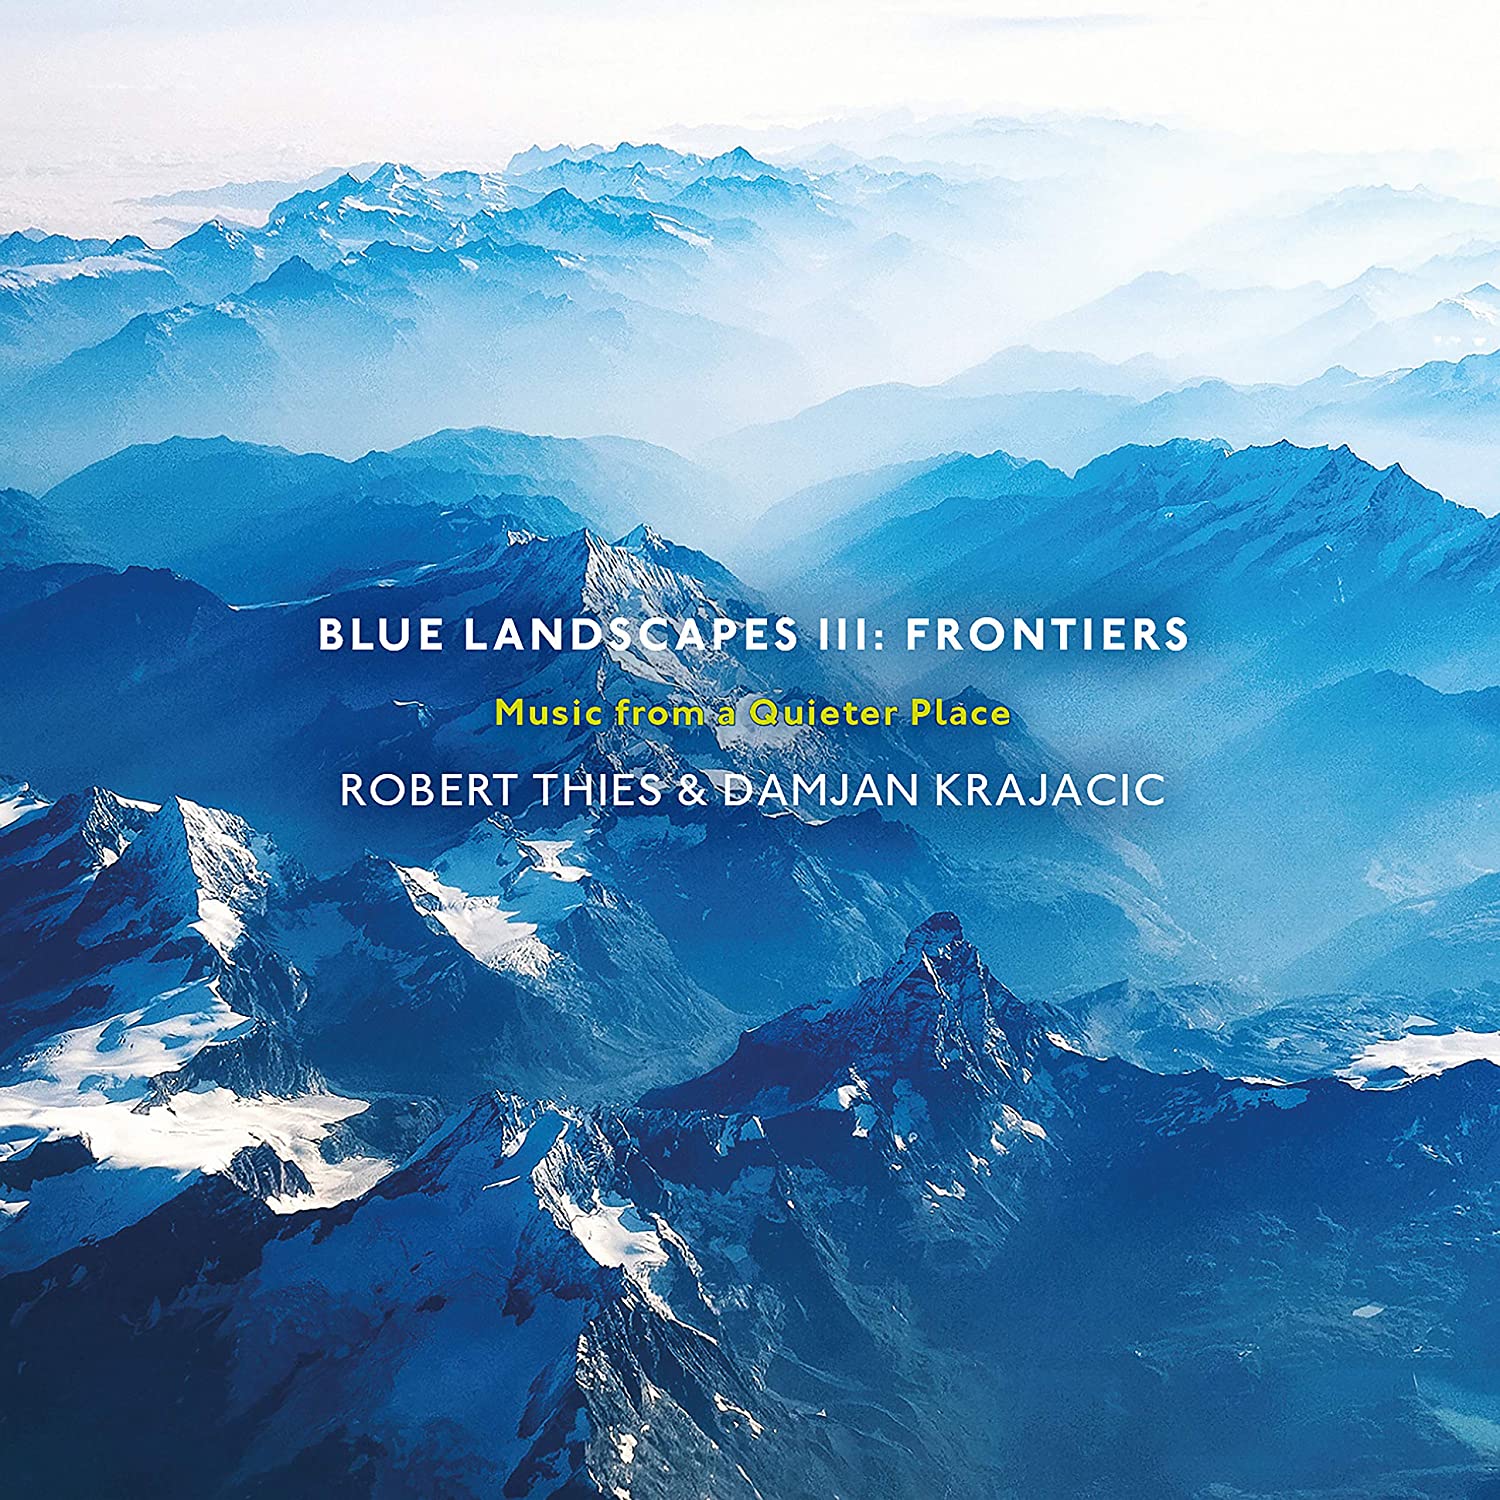 Art for Tranquility by Robert Thies & Damjan Krajacic